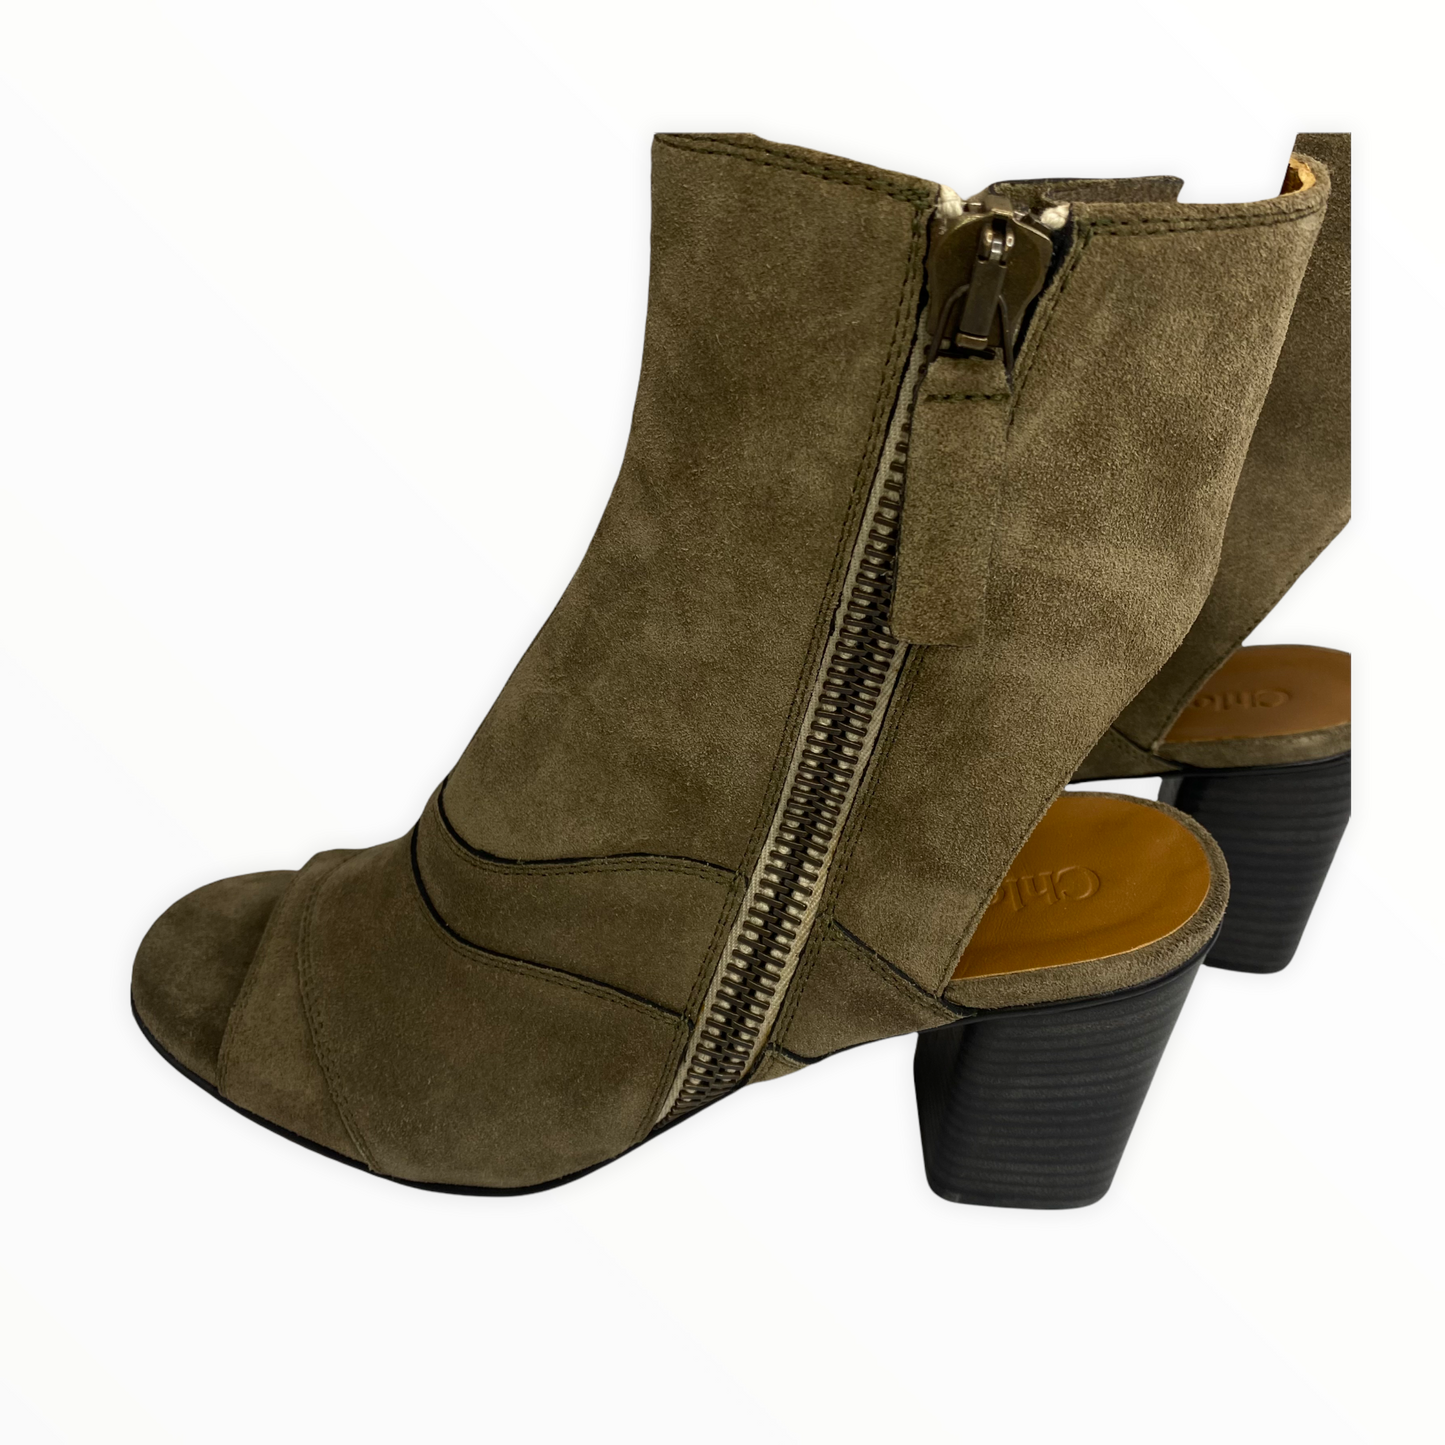 Lysis vintage Chloé open-toe boots - 38.5 - Fall 2016